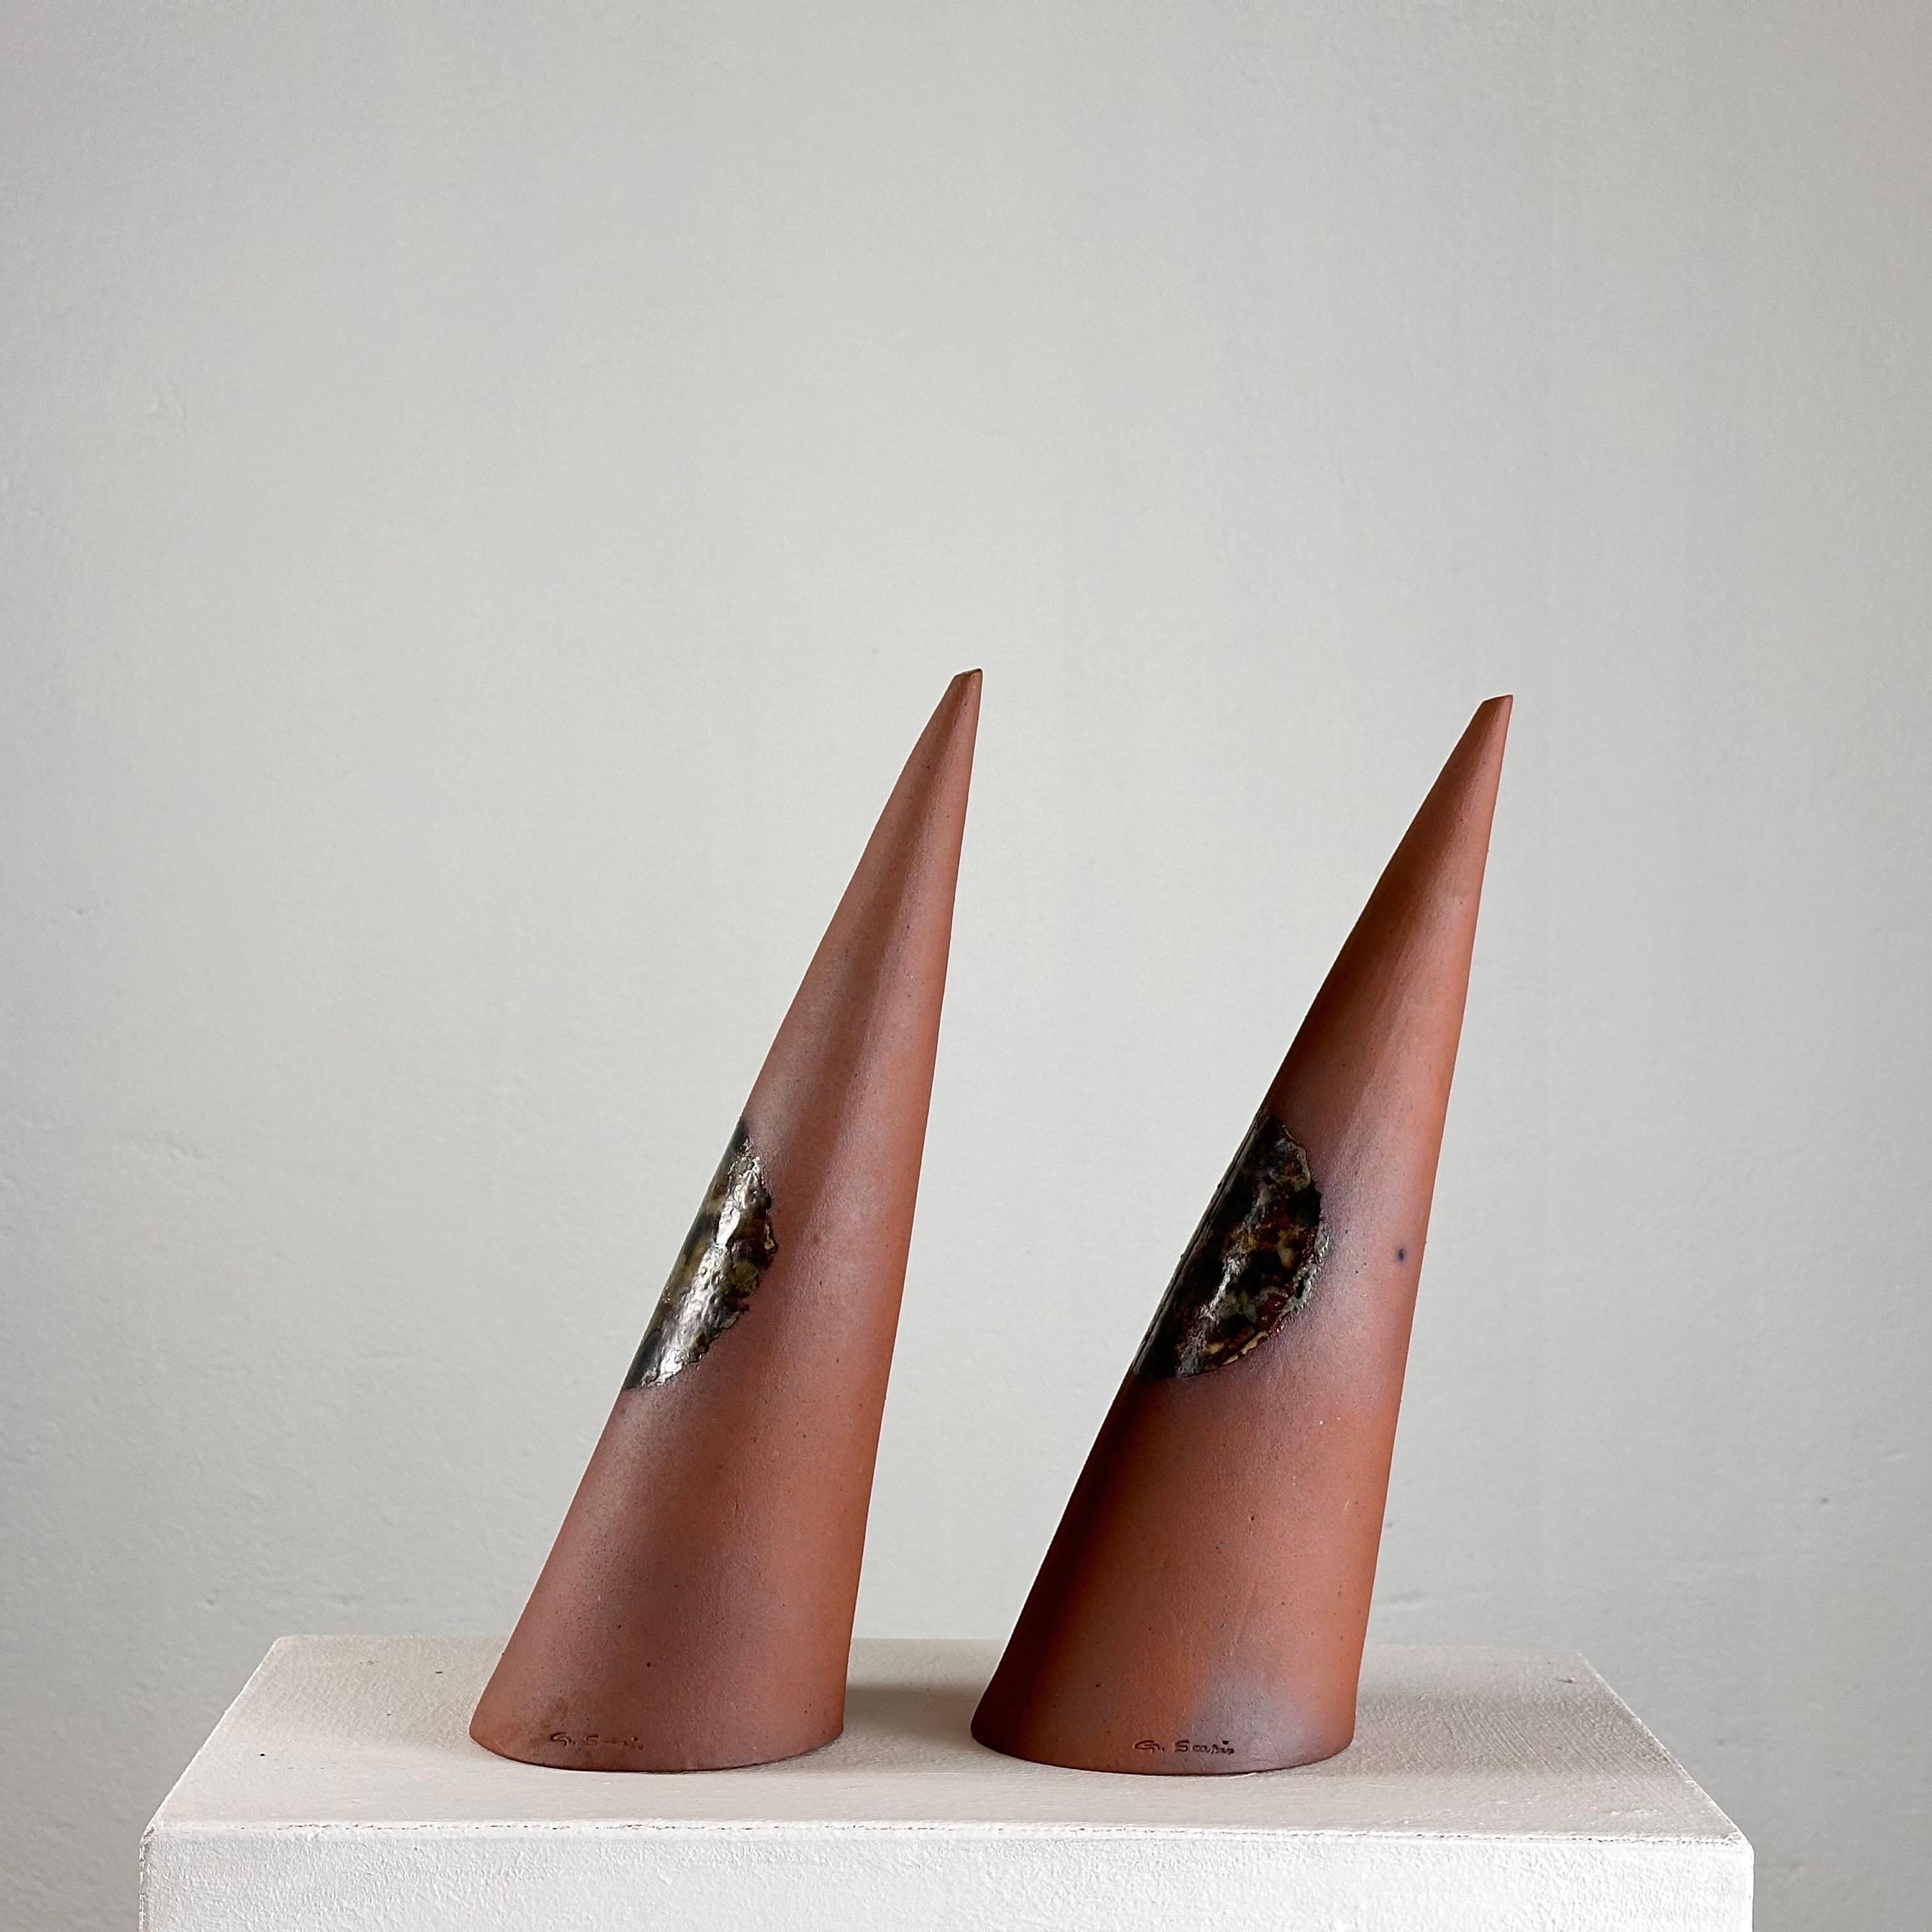 Mid-Century Modern Exquisite Hand-Painted Ceramic Decorative Cones by Giancarlo Scapin, 1970s For Sale